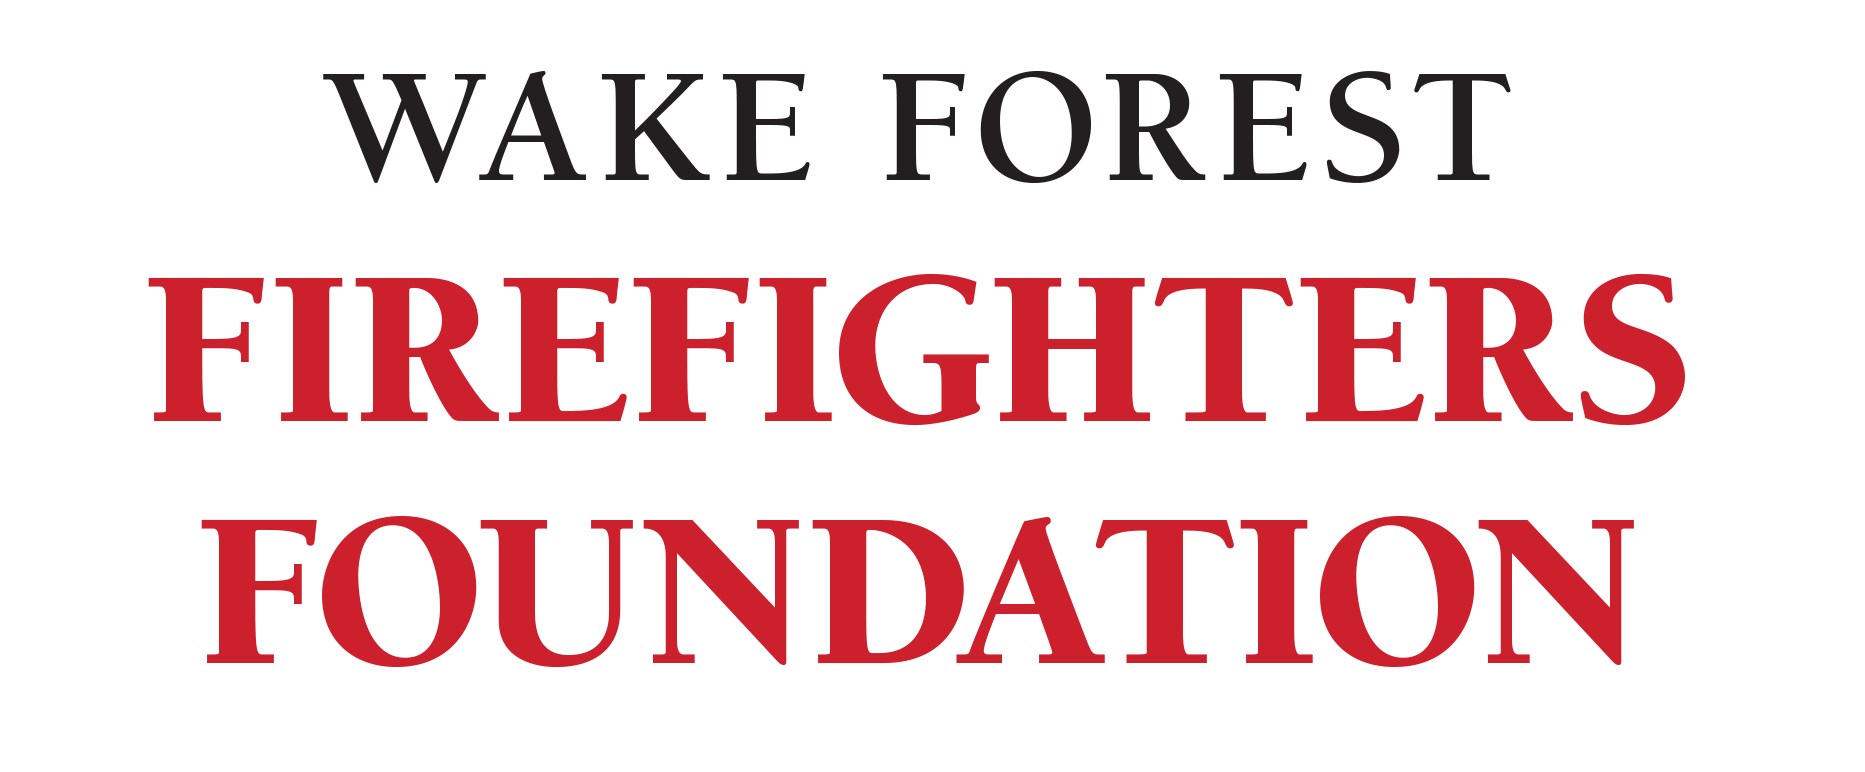 WF Firefighters Foundation